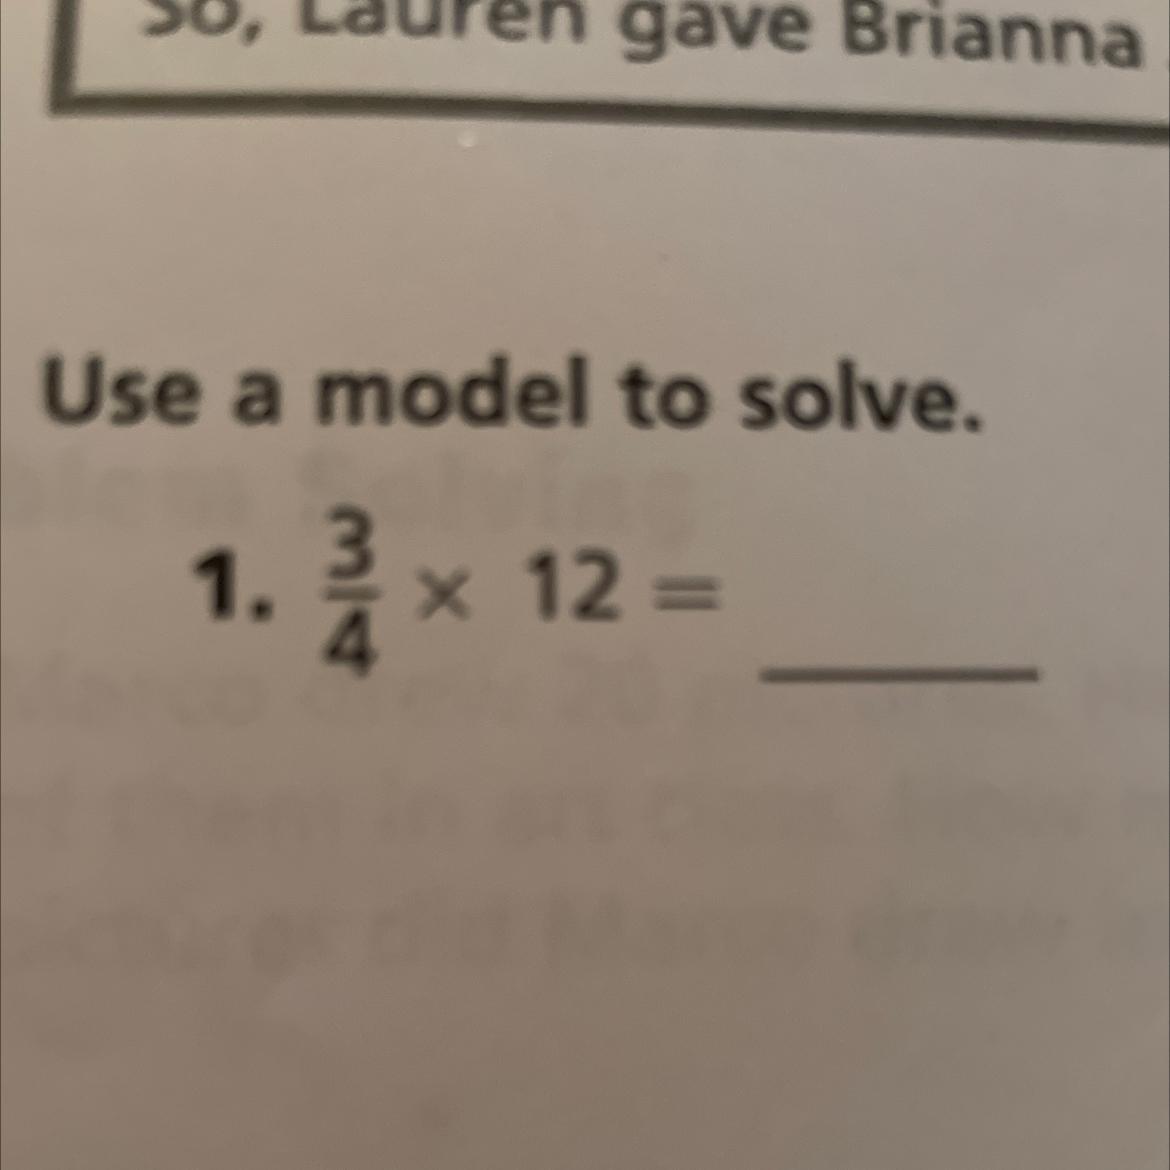 Hello Can You Please Help Me Out With This Question Please 